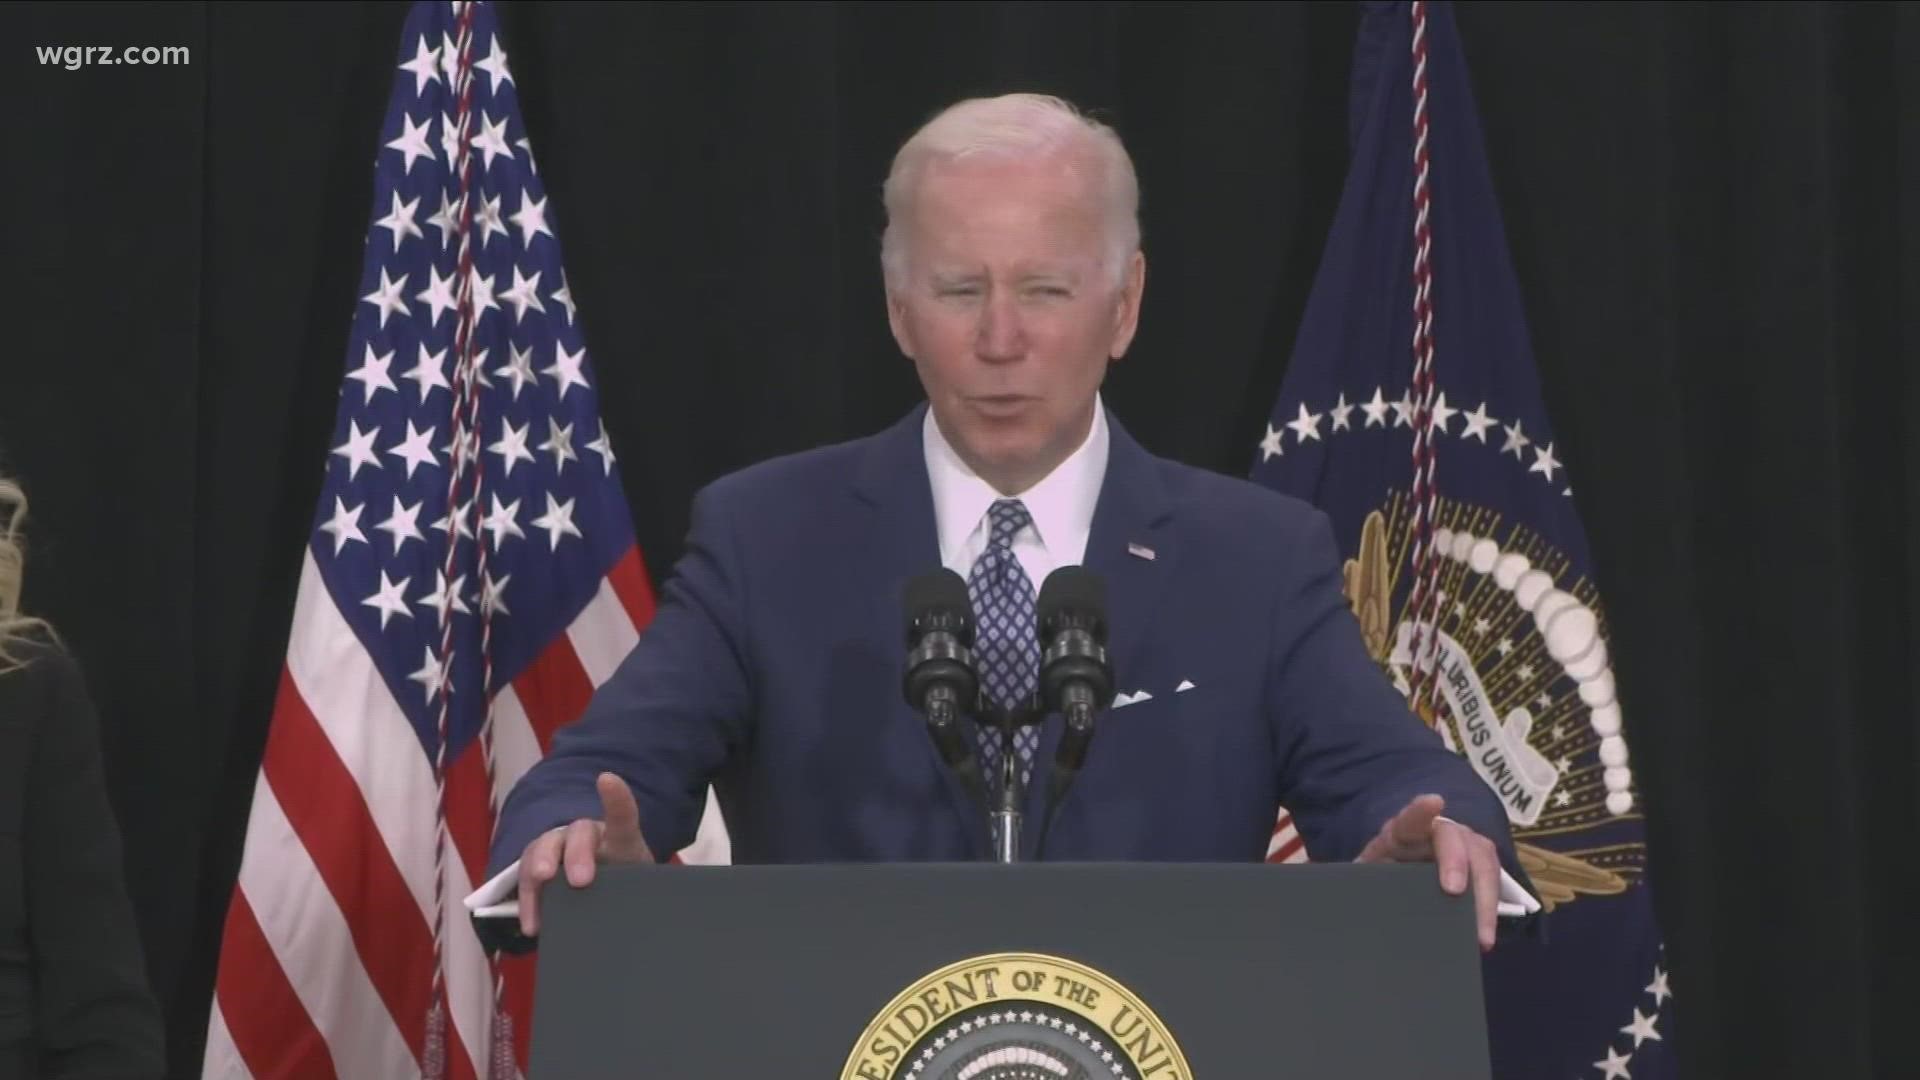 On his visit here, president Biden offered words of  healing, encouragement, and did so while issuing a challenge to all of us.